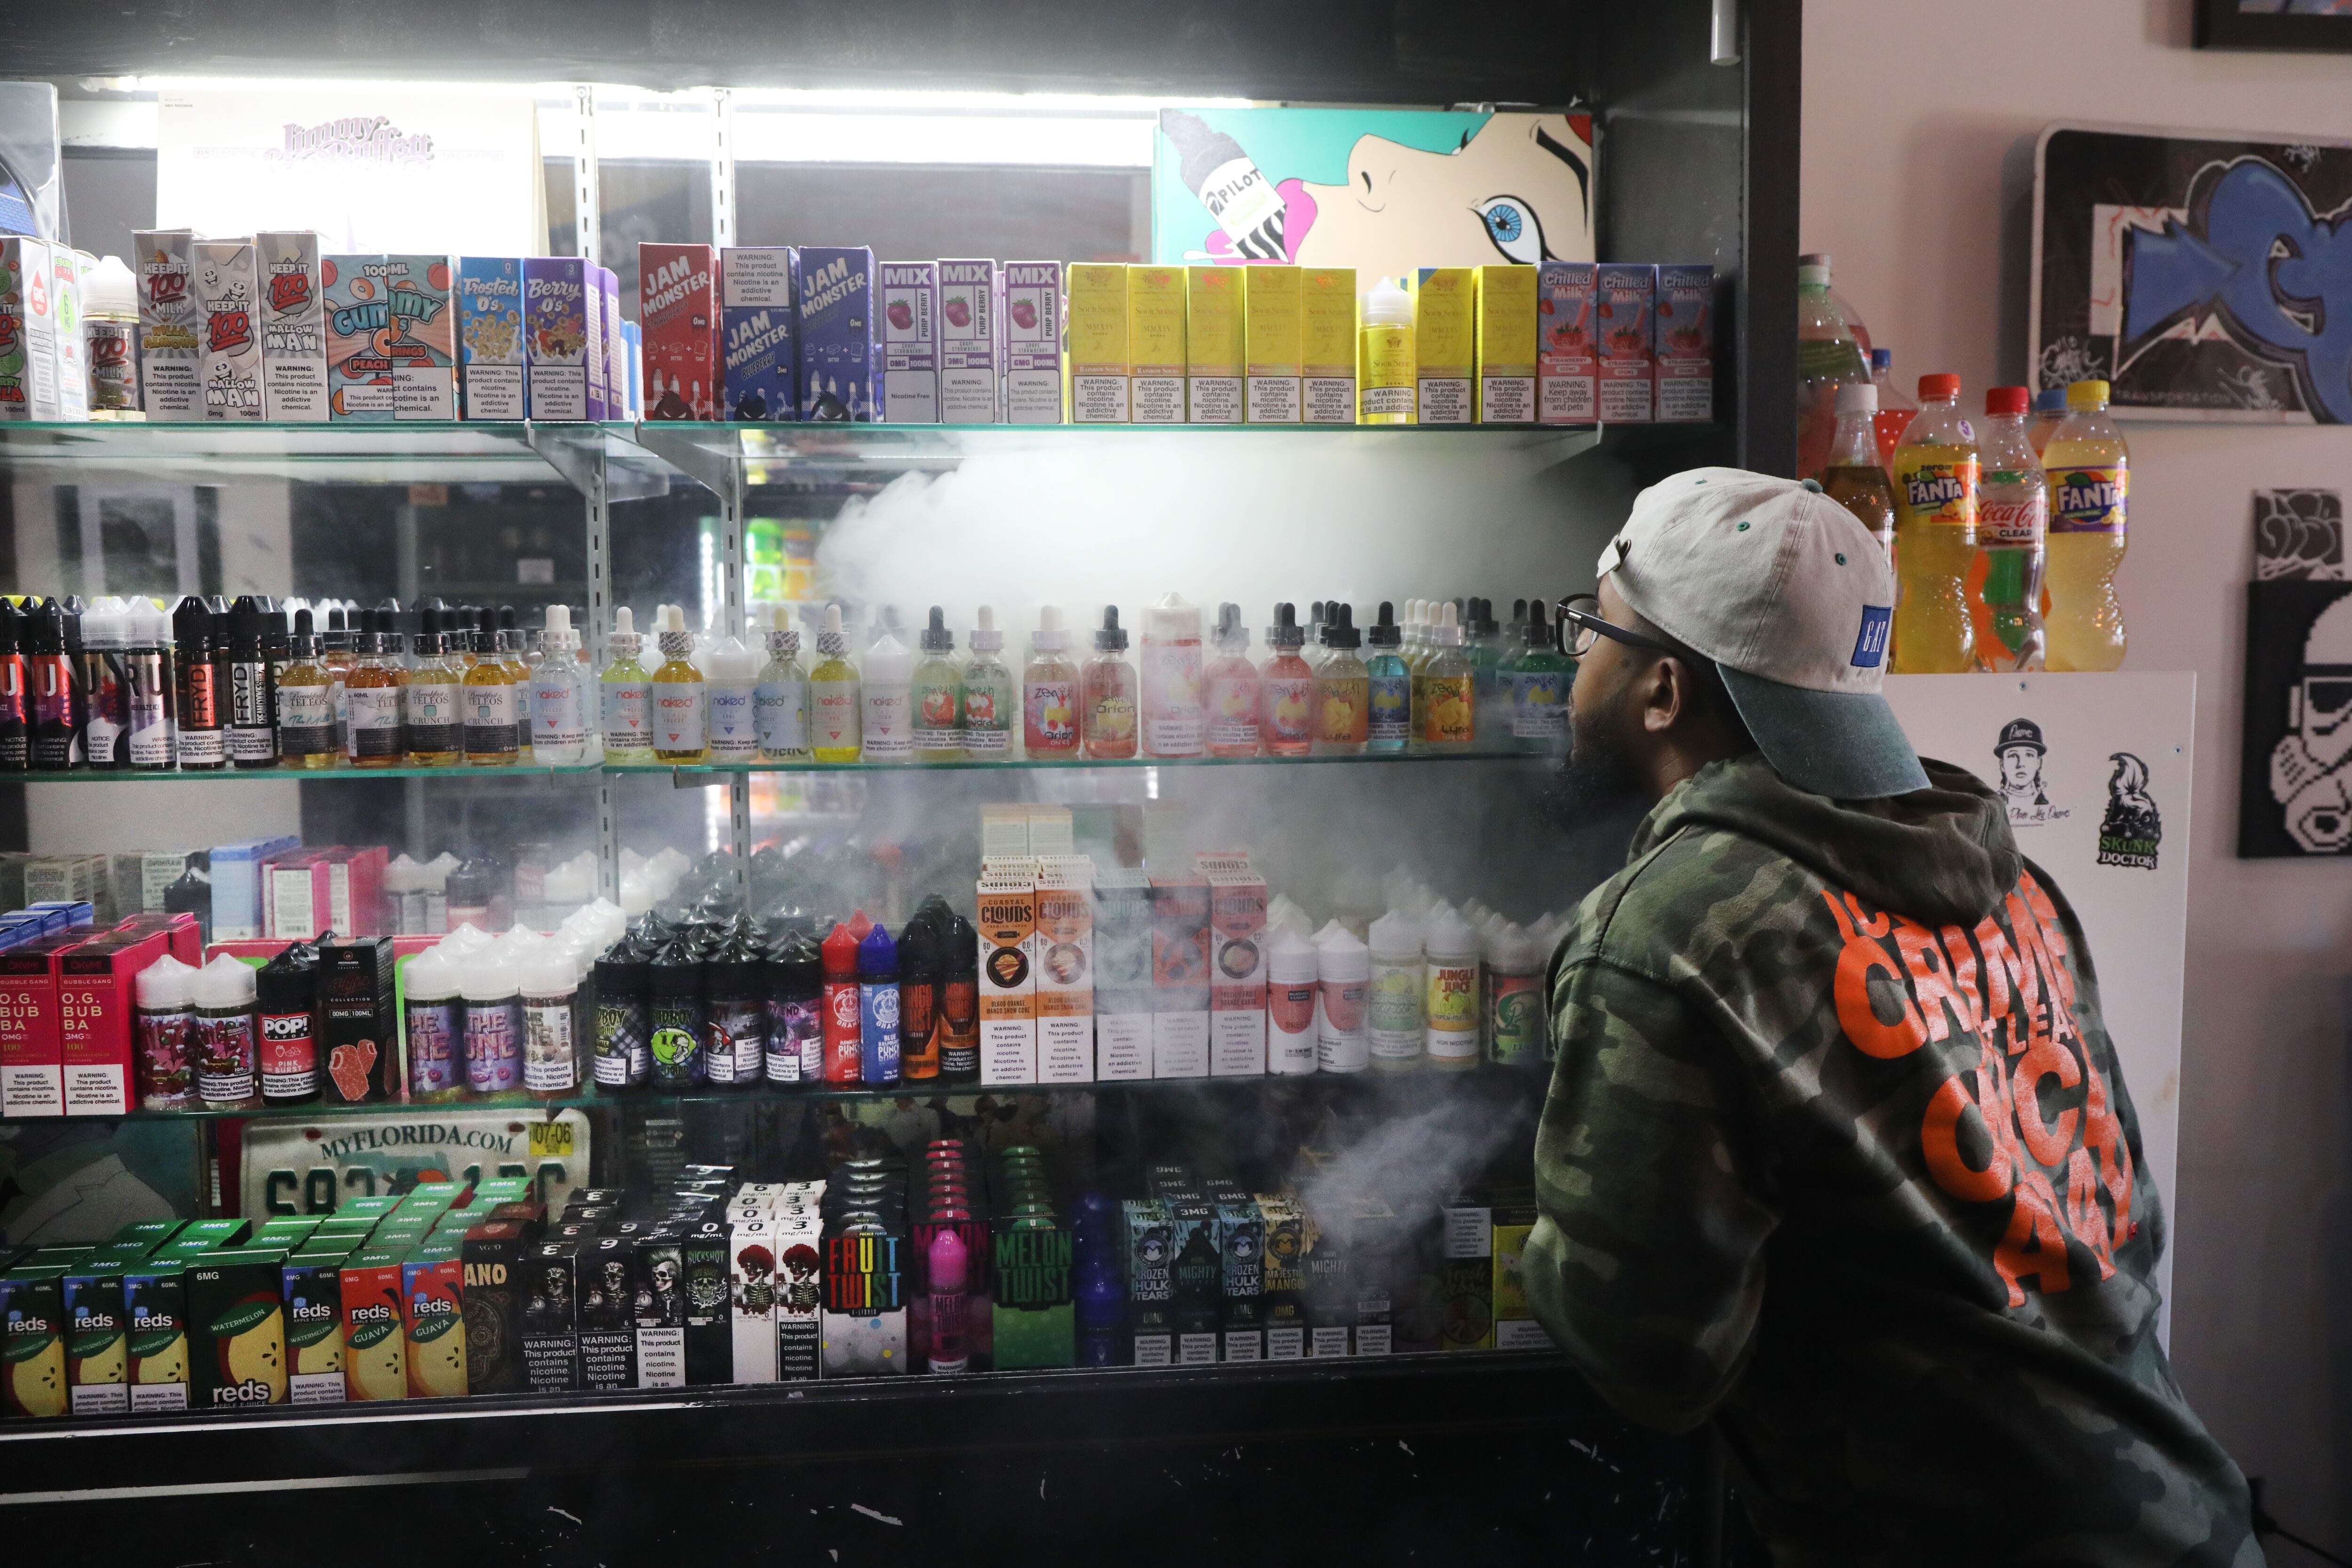 A worker in a vape story looks at shelves full of vaping merchandise with vape smoke in the air.